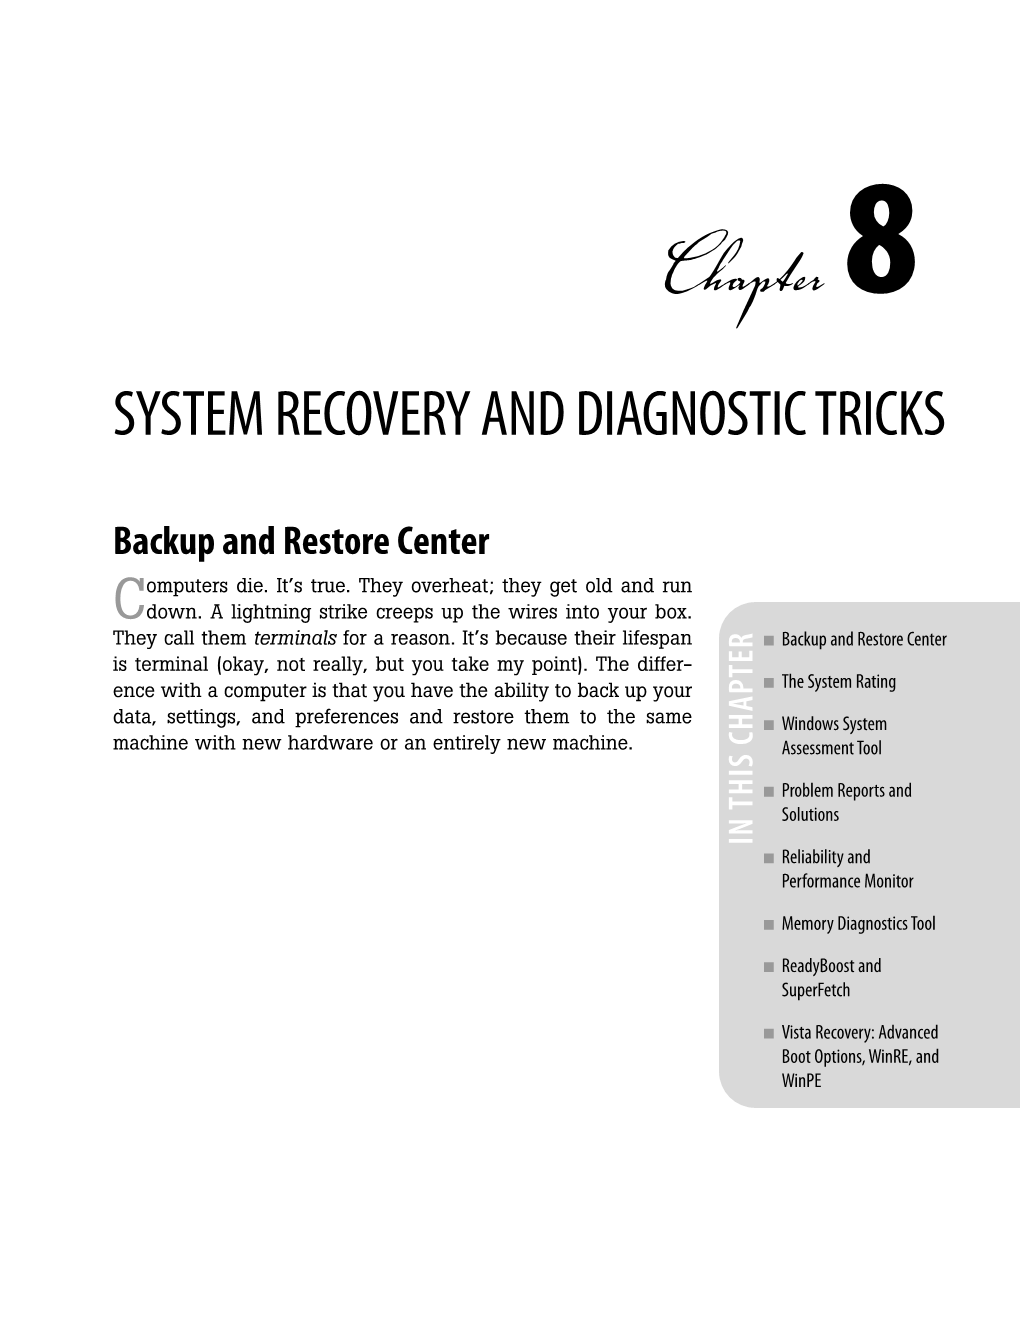 Chapter 8 SYSTEM RECOVERY and DIAGNOSTIC TRICKS